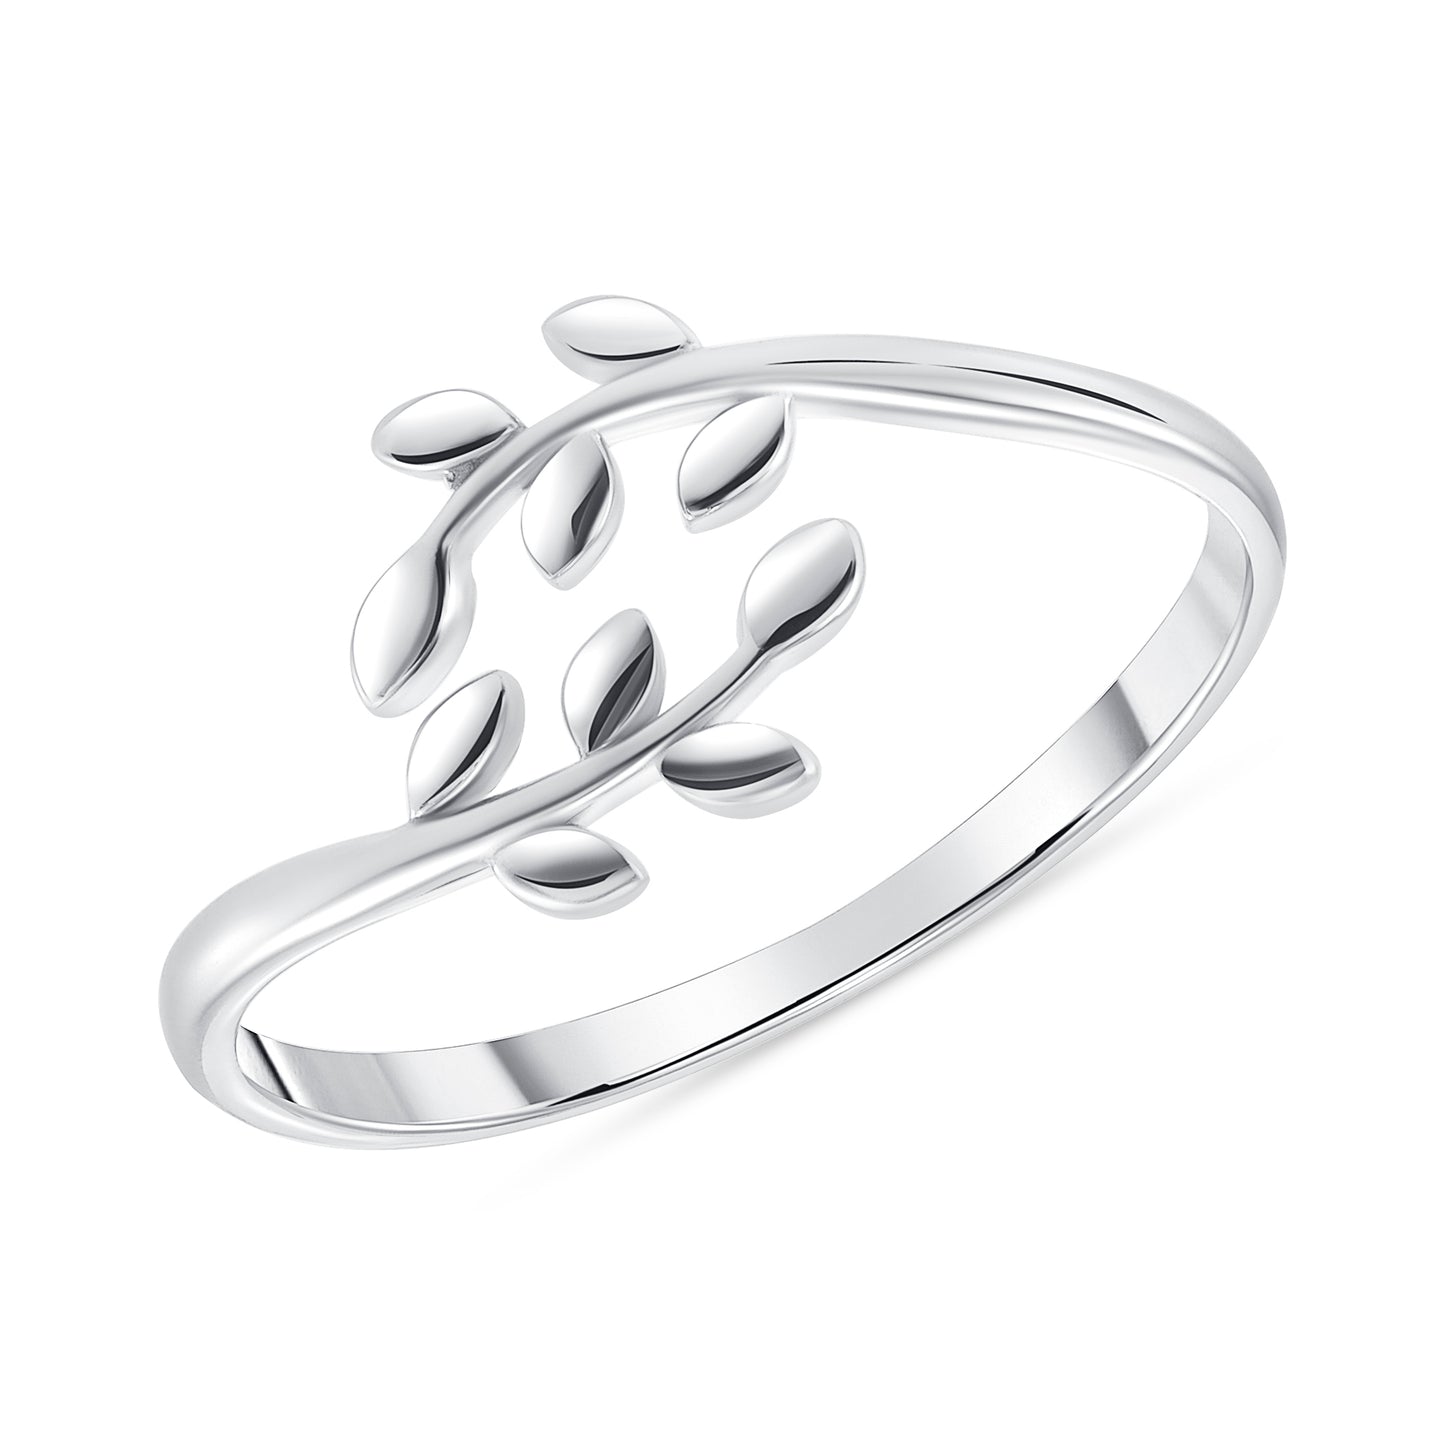 Silver 925 Rhodium Plated Two Leaf Ring. MD016